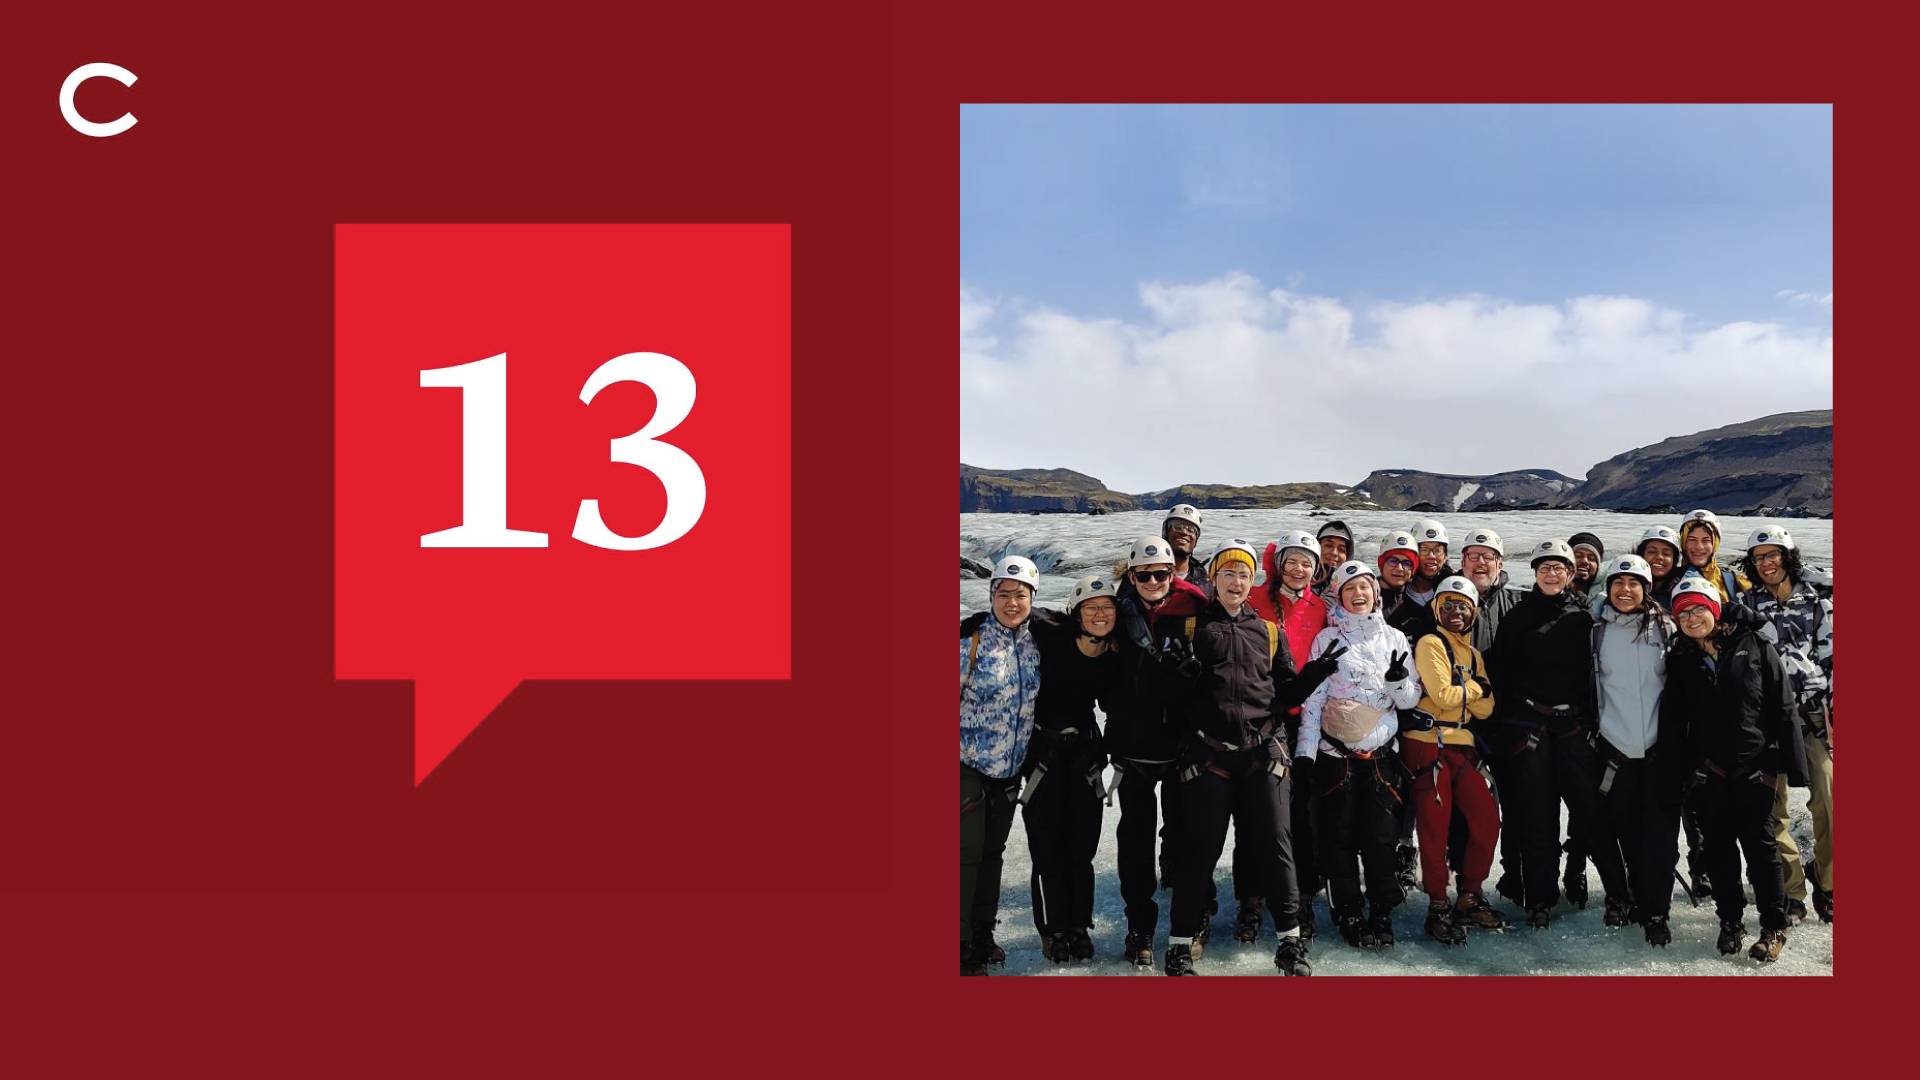 13 icon and group photo of students in Iceland